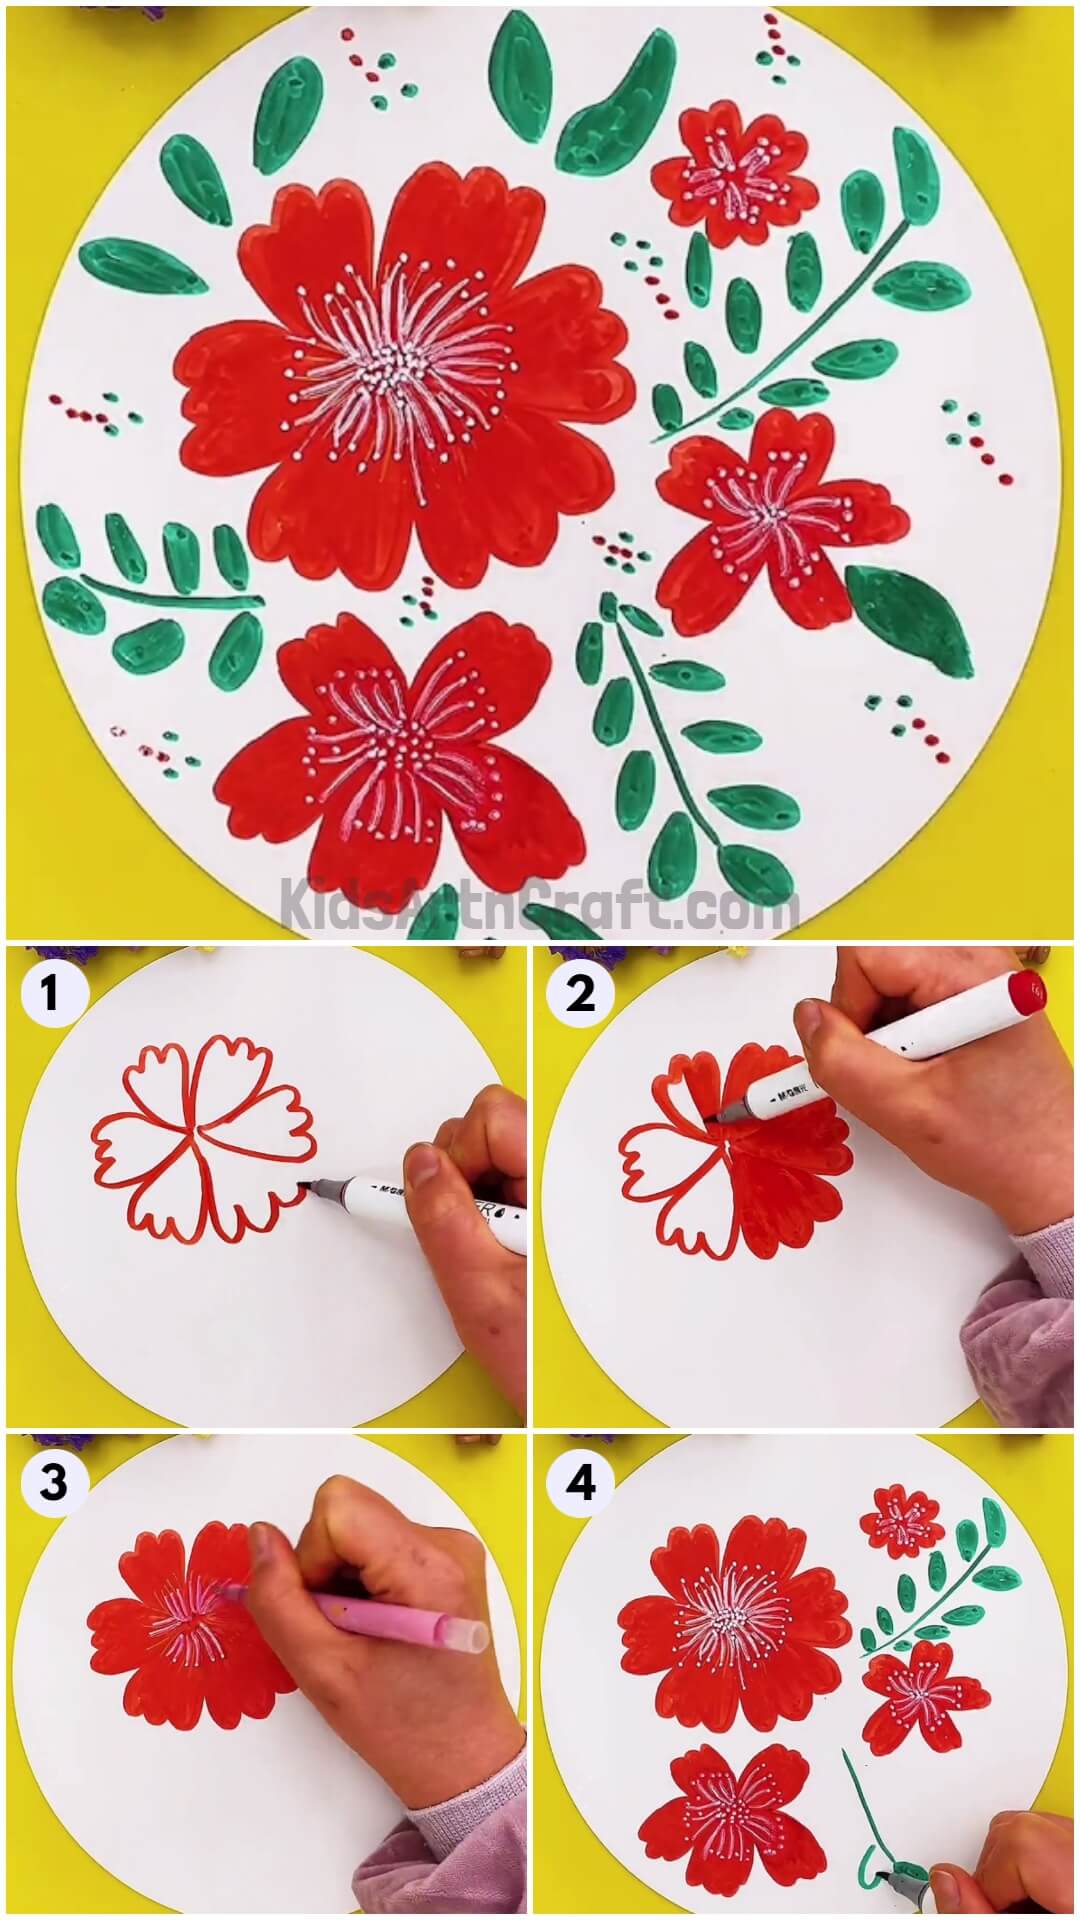 Pretty Red flowers Artwork Step by Step Instructions